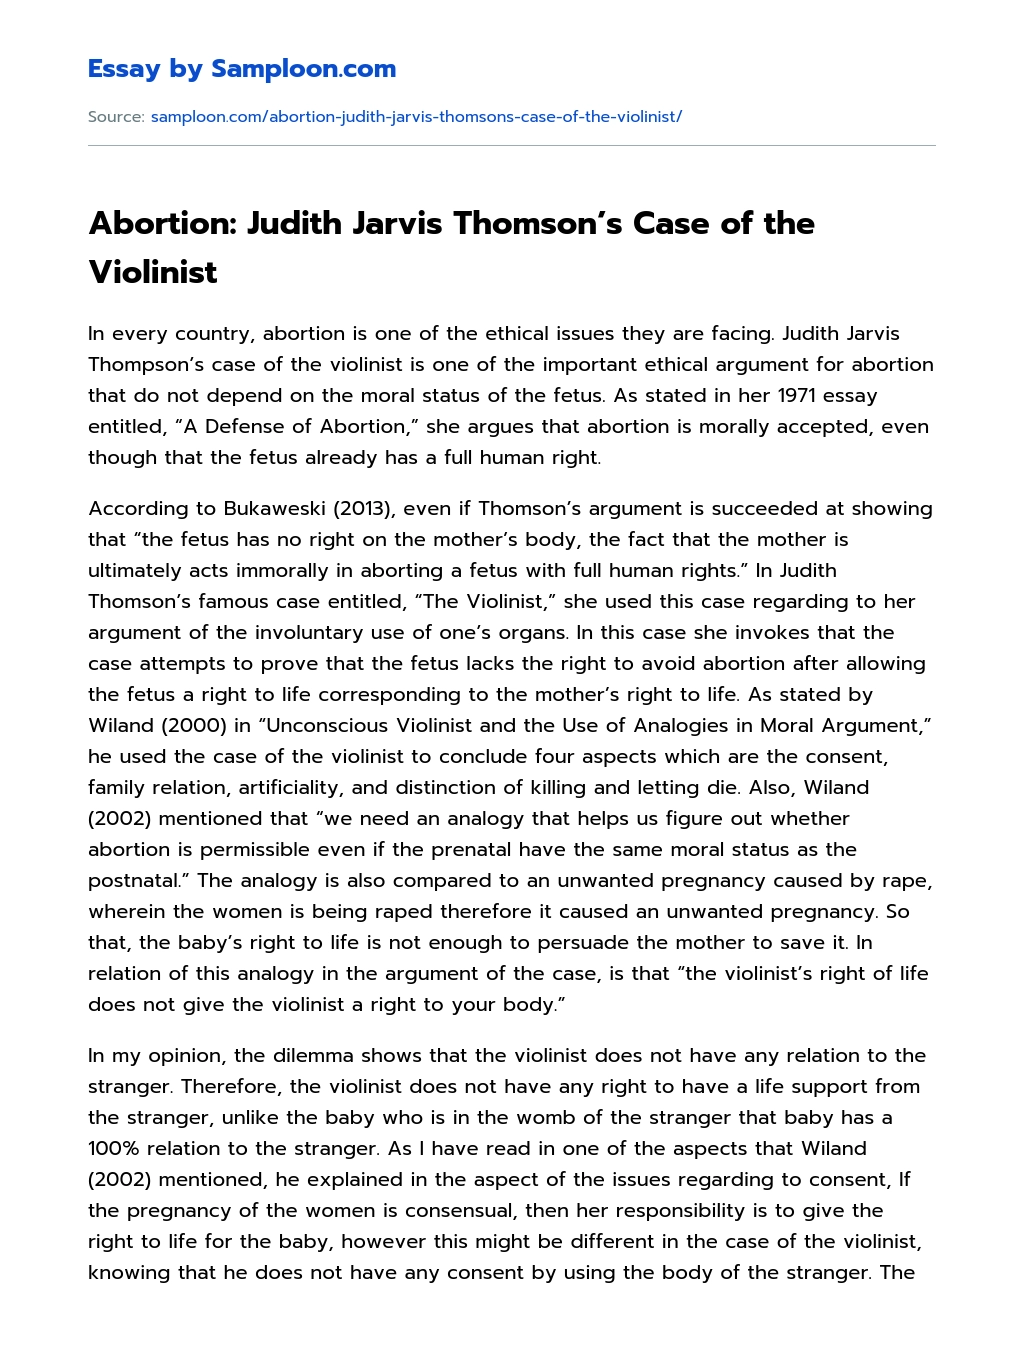 Abortion: Judith Jarvis Thomson’s Case of the Violinist Summary essay